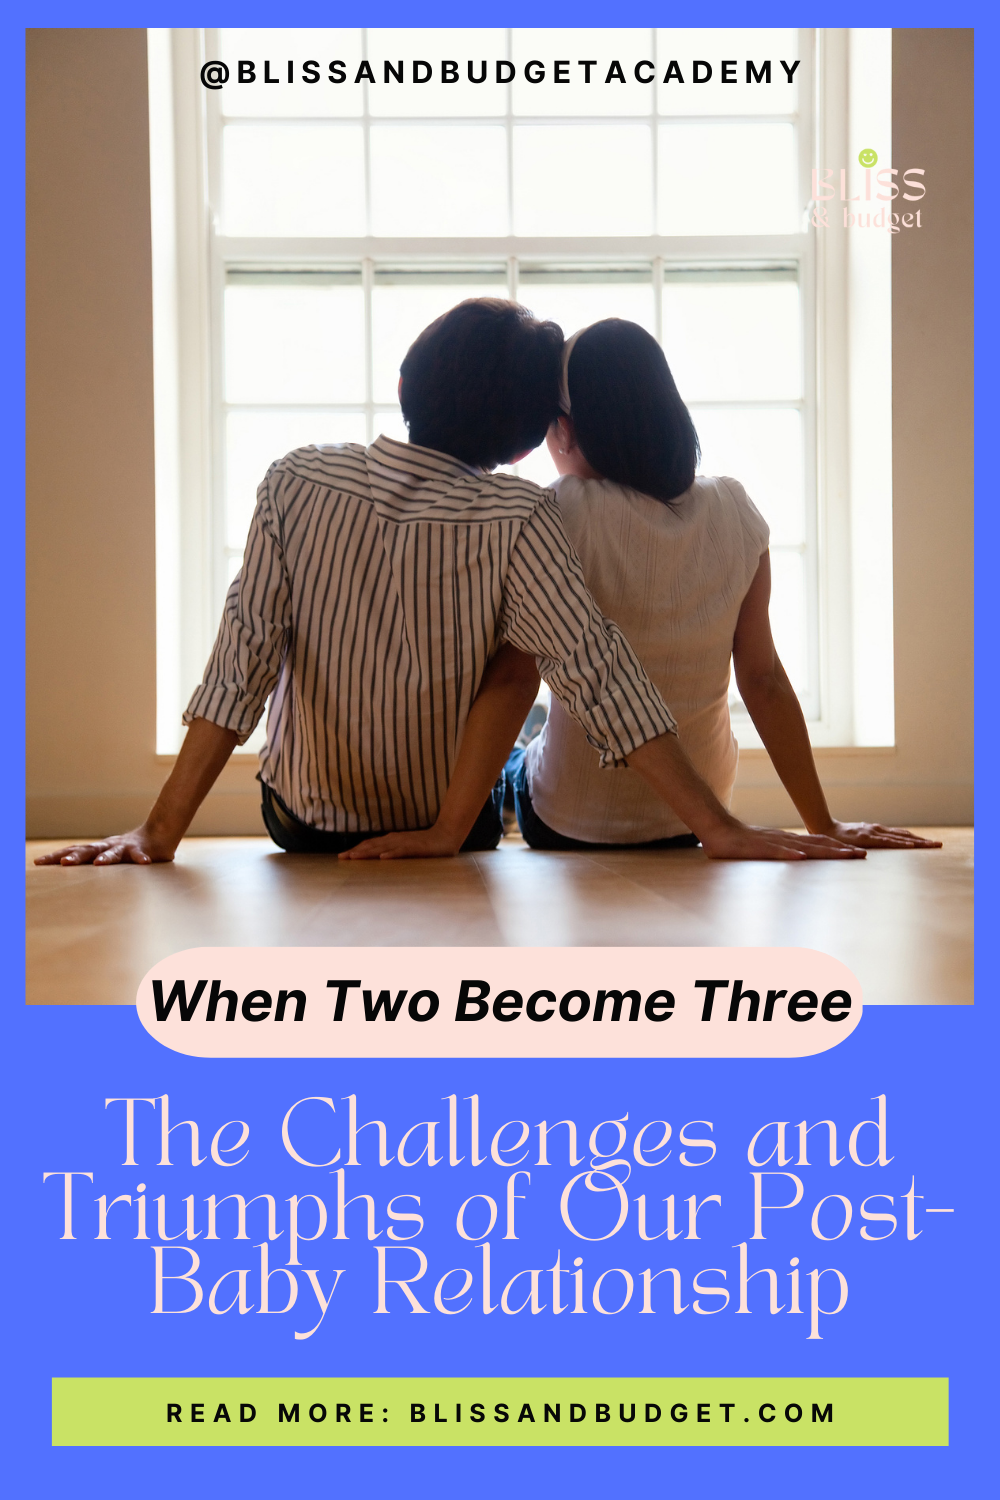 When Two Become Three: The Challenges and Triumphs of Our Post-Baby Relationship